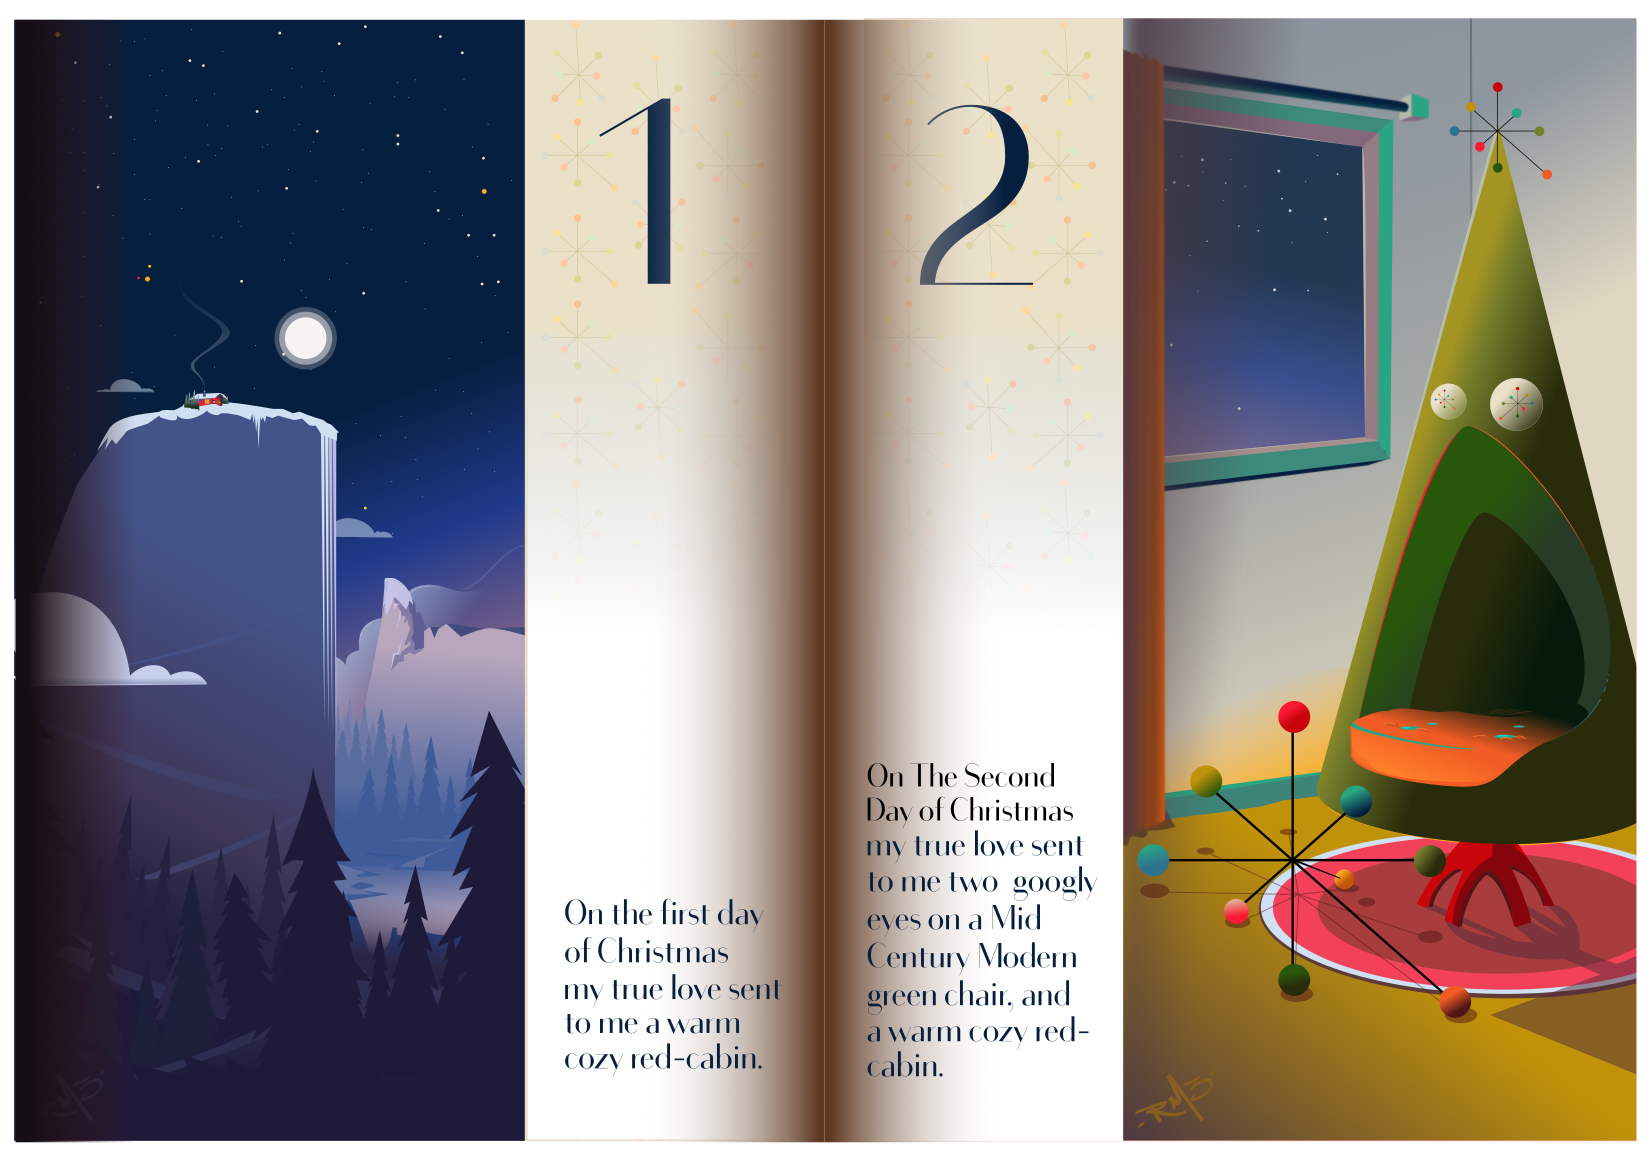 rm3_12_days of Christmas_midcentury_modern_002.png